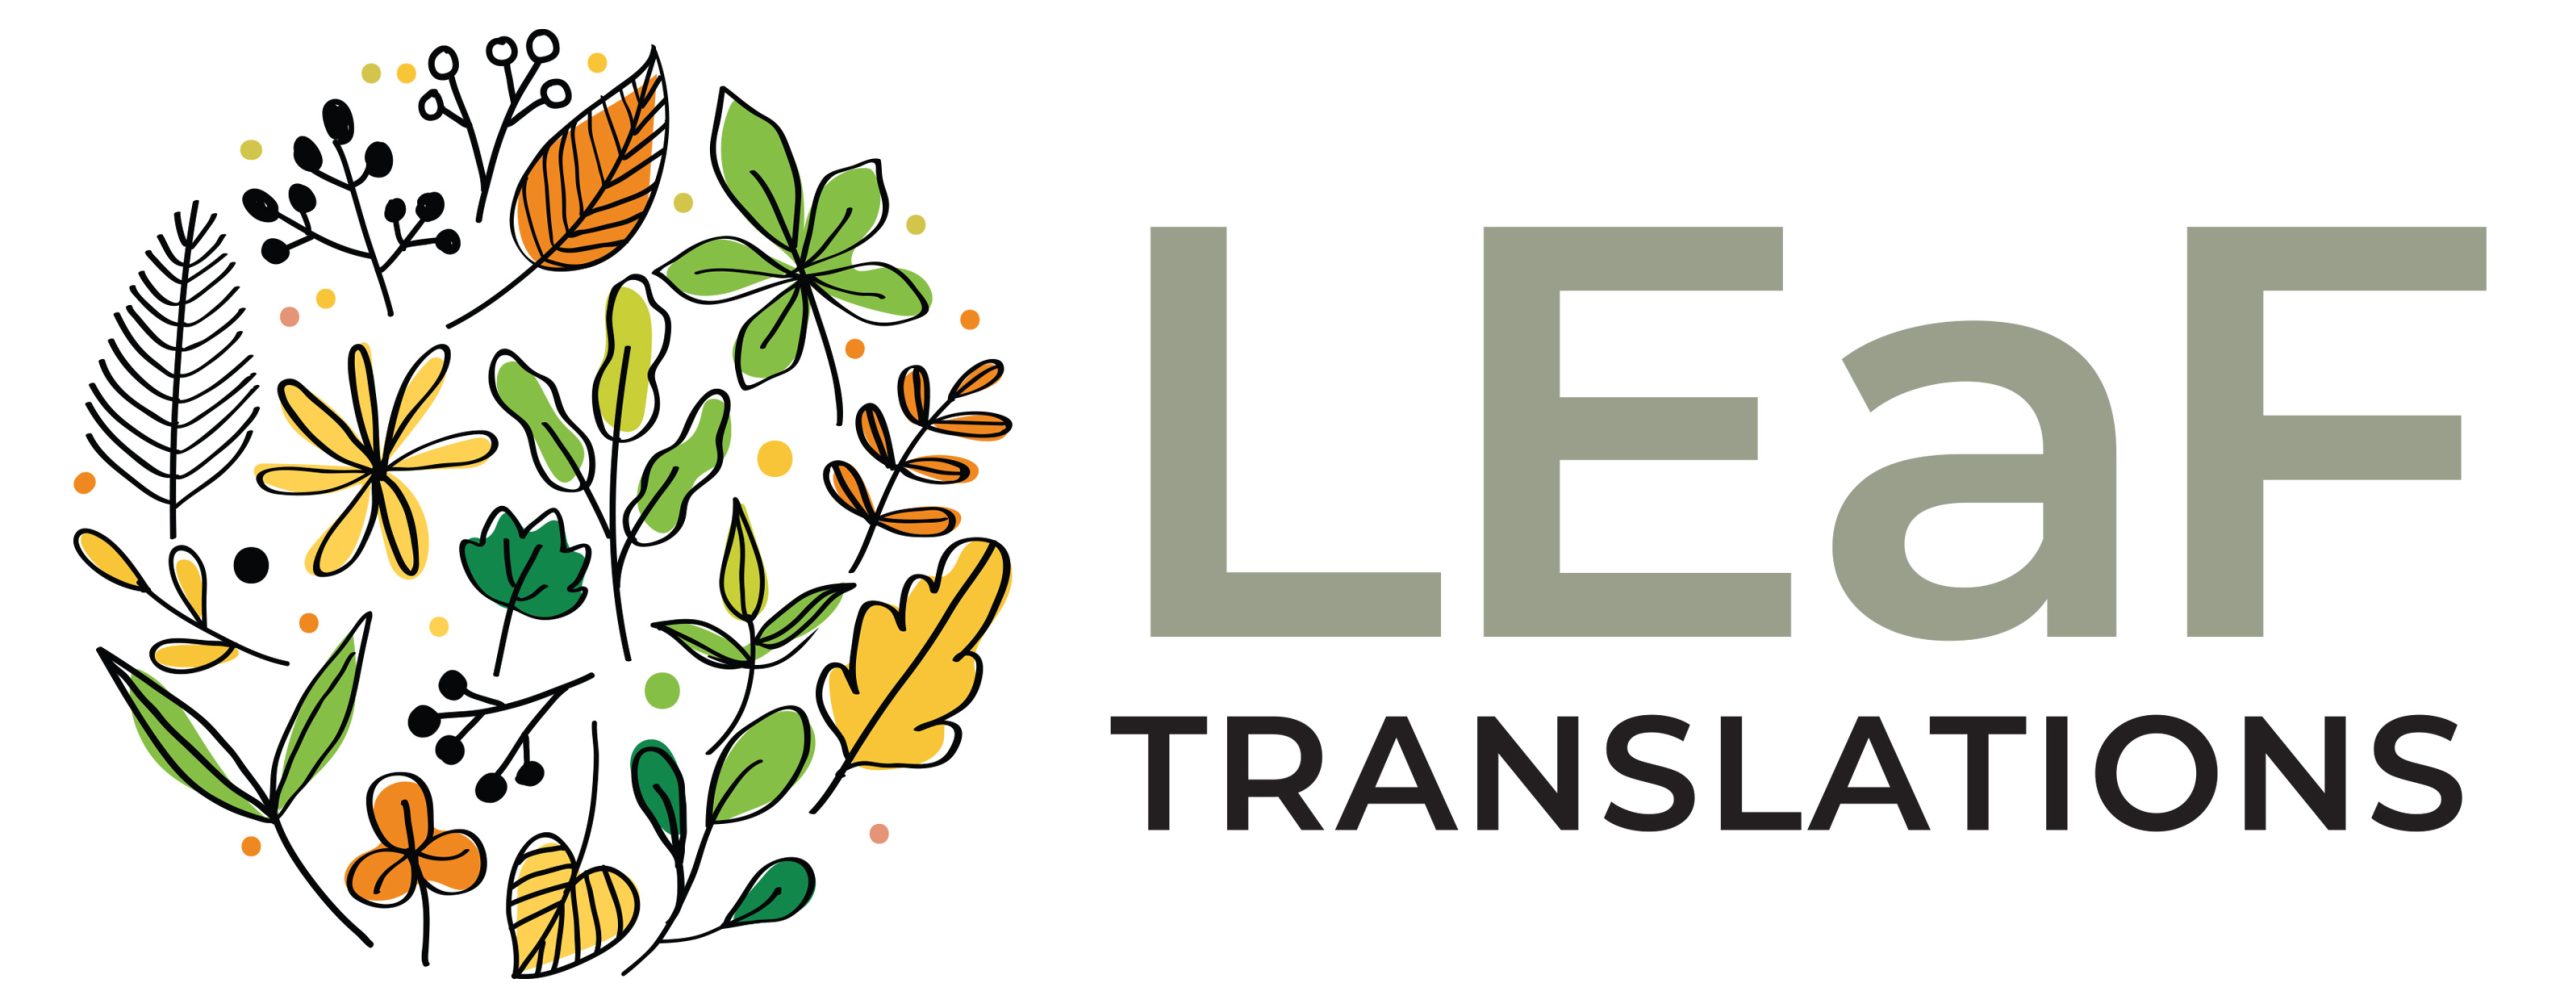 LEaF Translations is the ATC’s Member of the Month